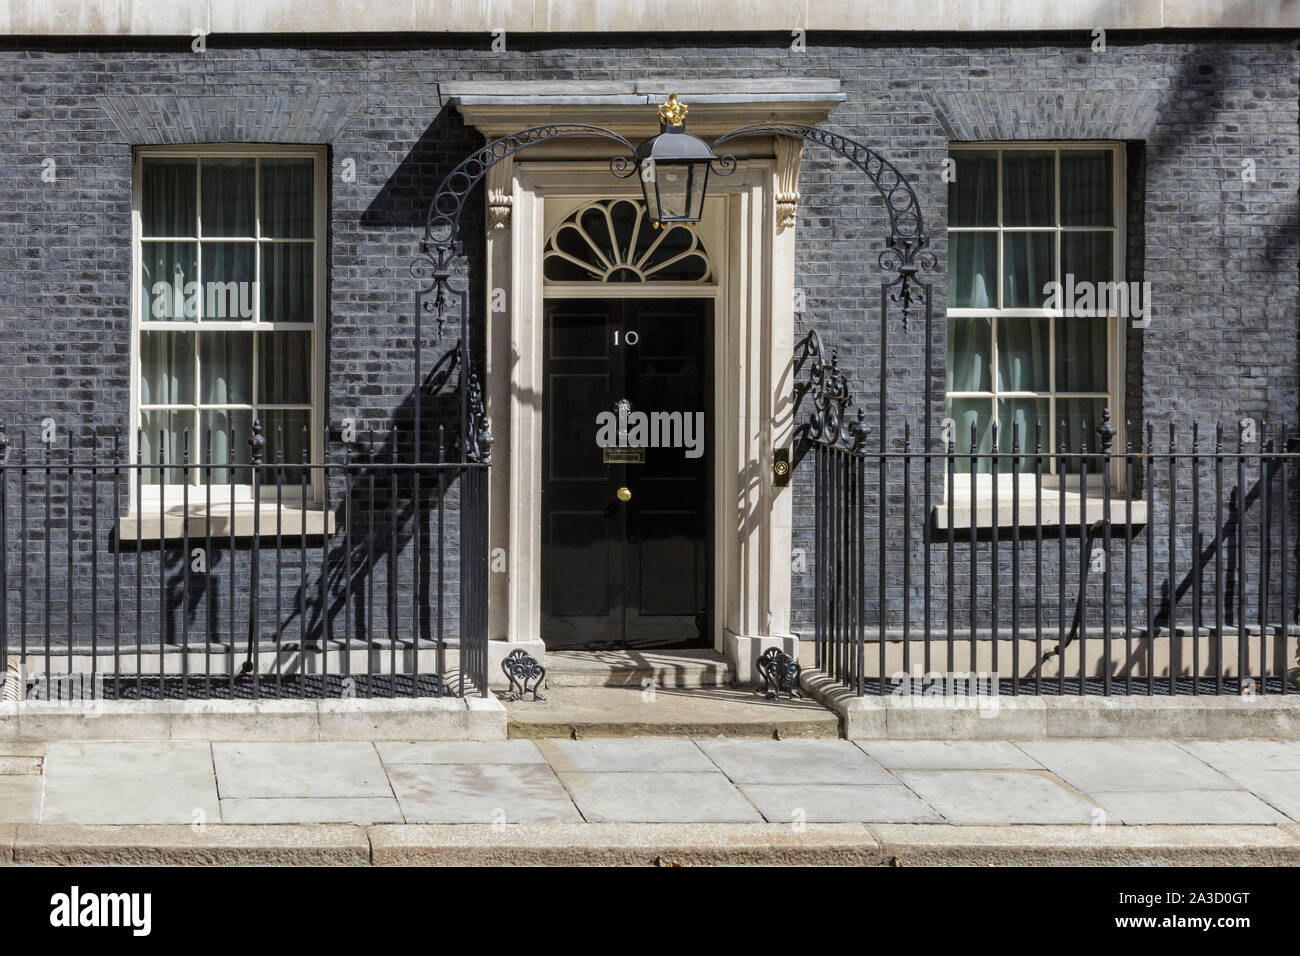 No 10 Downing Street, British Prime Minister's residence, exterior with closed door and nobody in frame, sunny daytime, London, UK Stock Photo